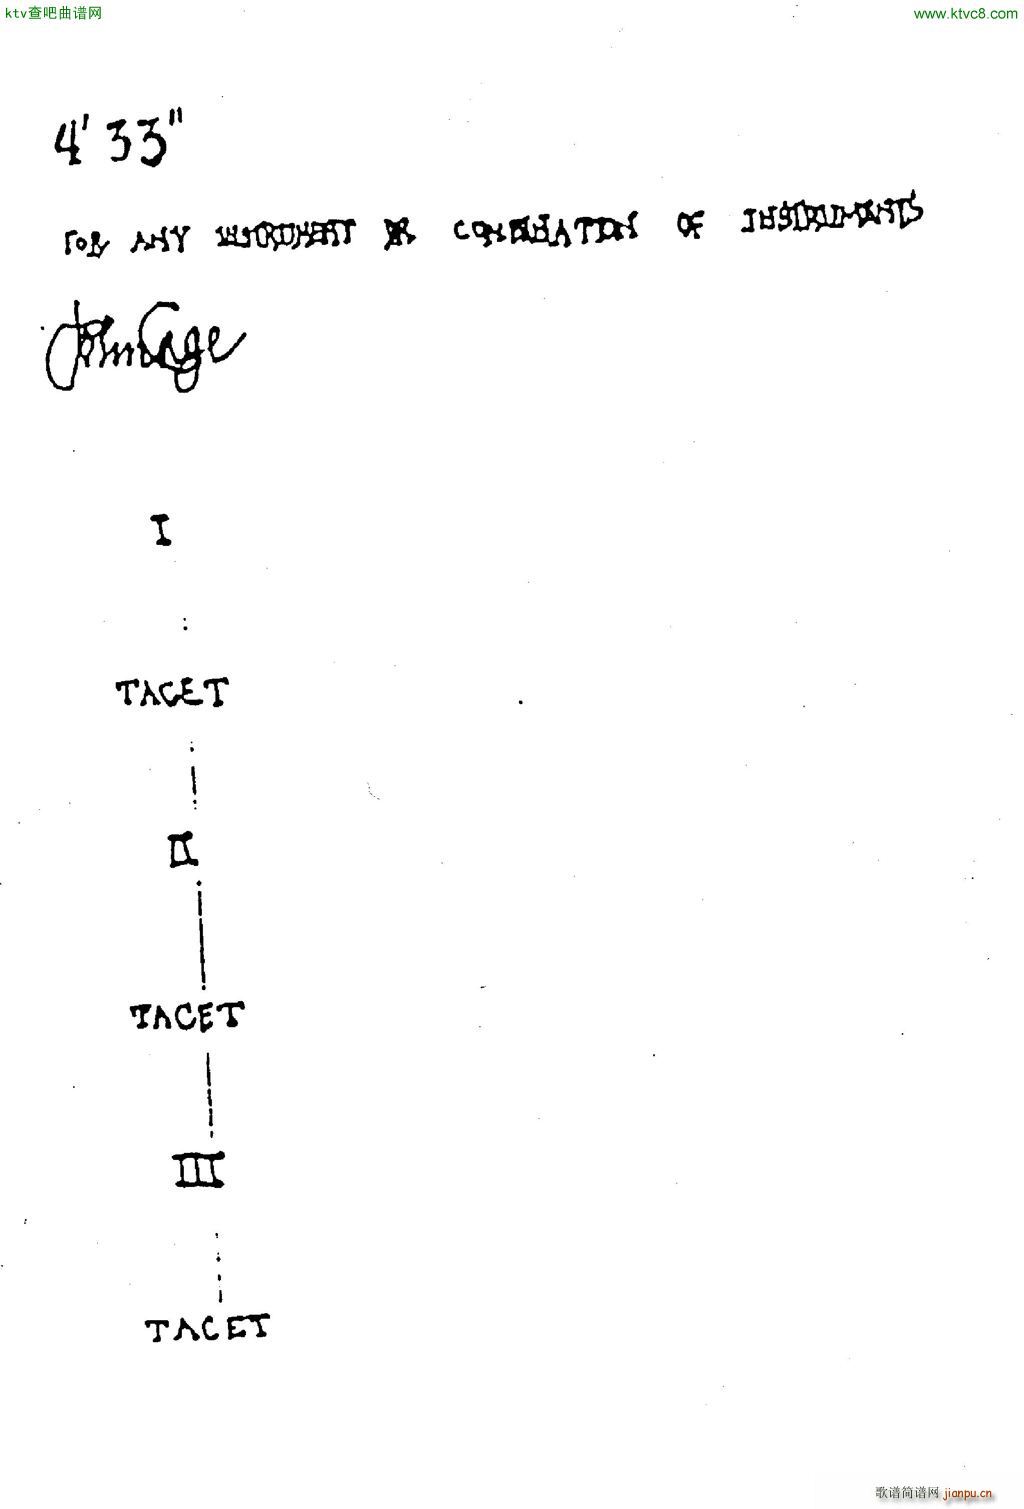 John Cage 4 33 in his own hand()1